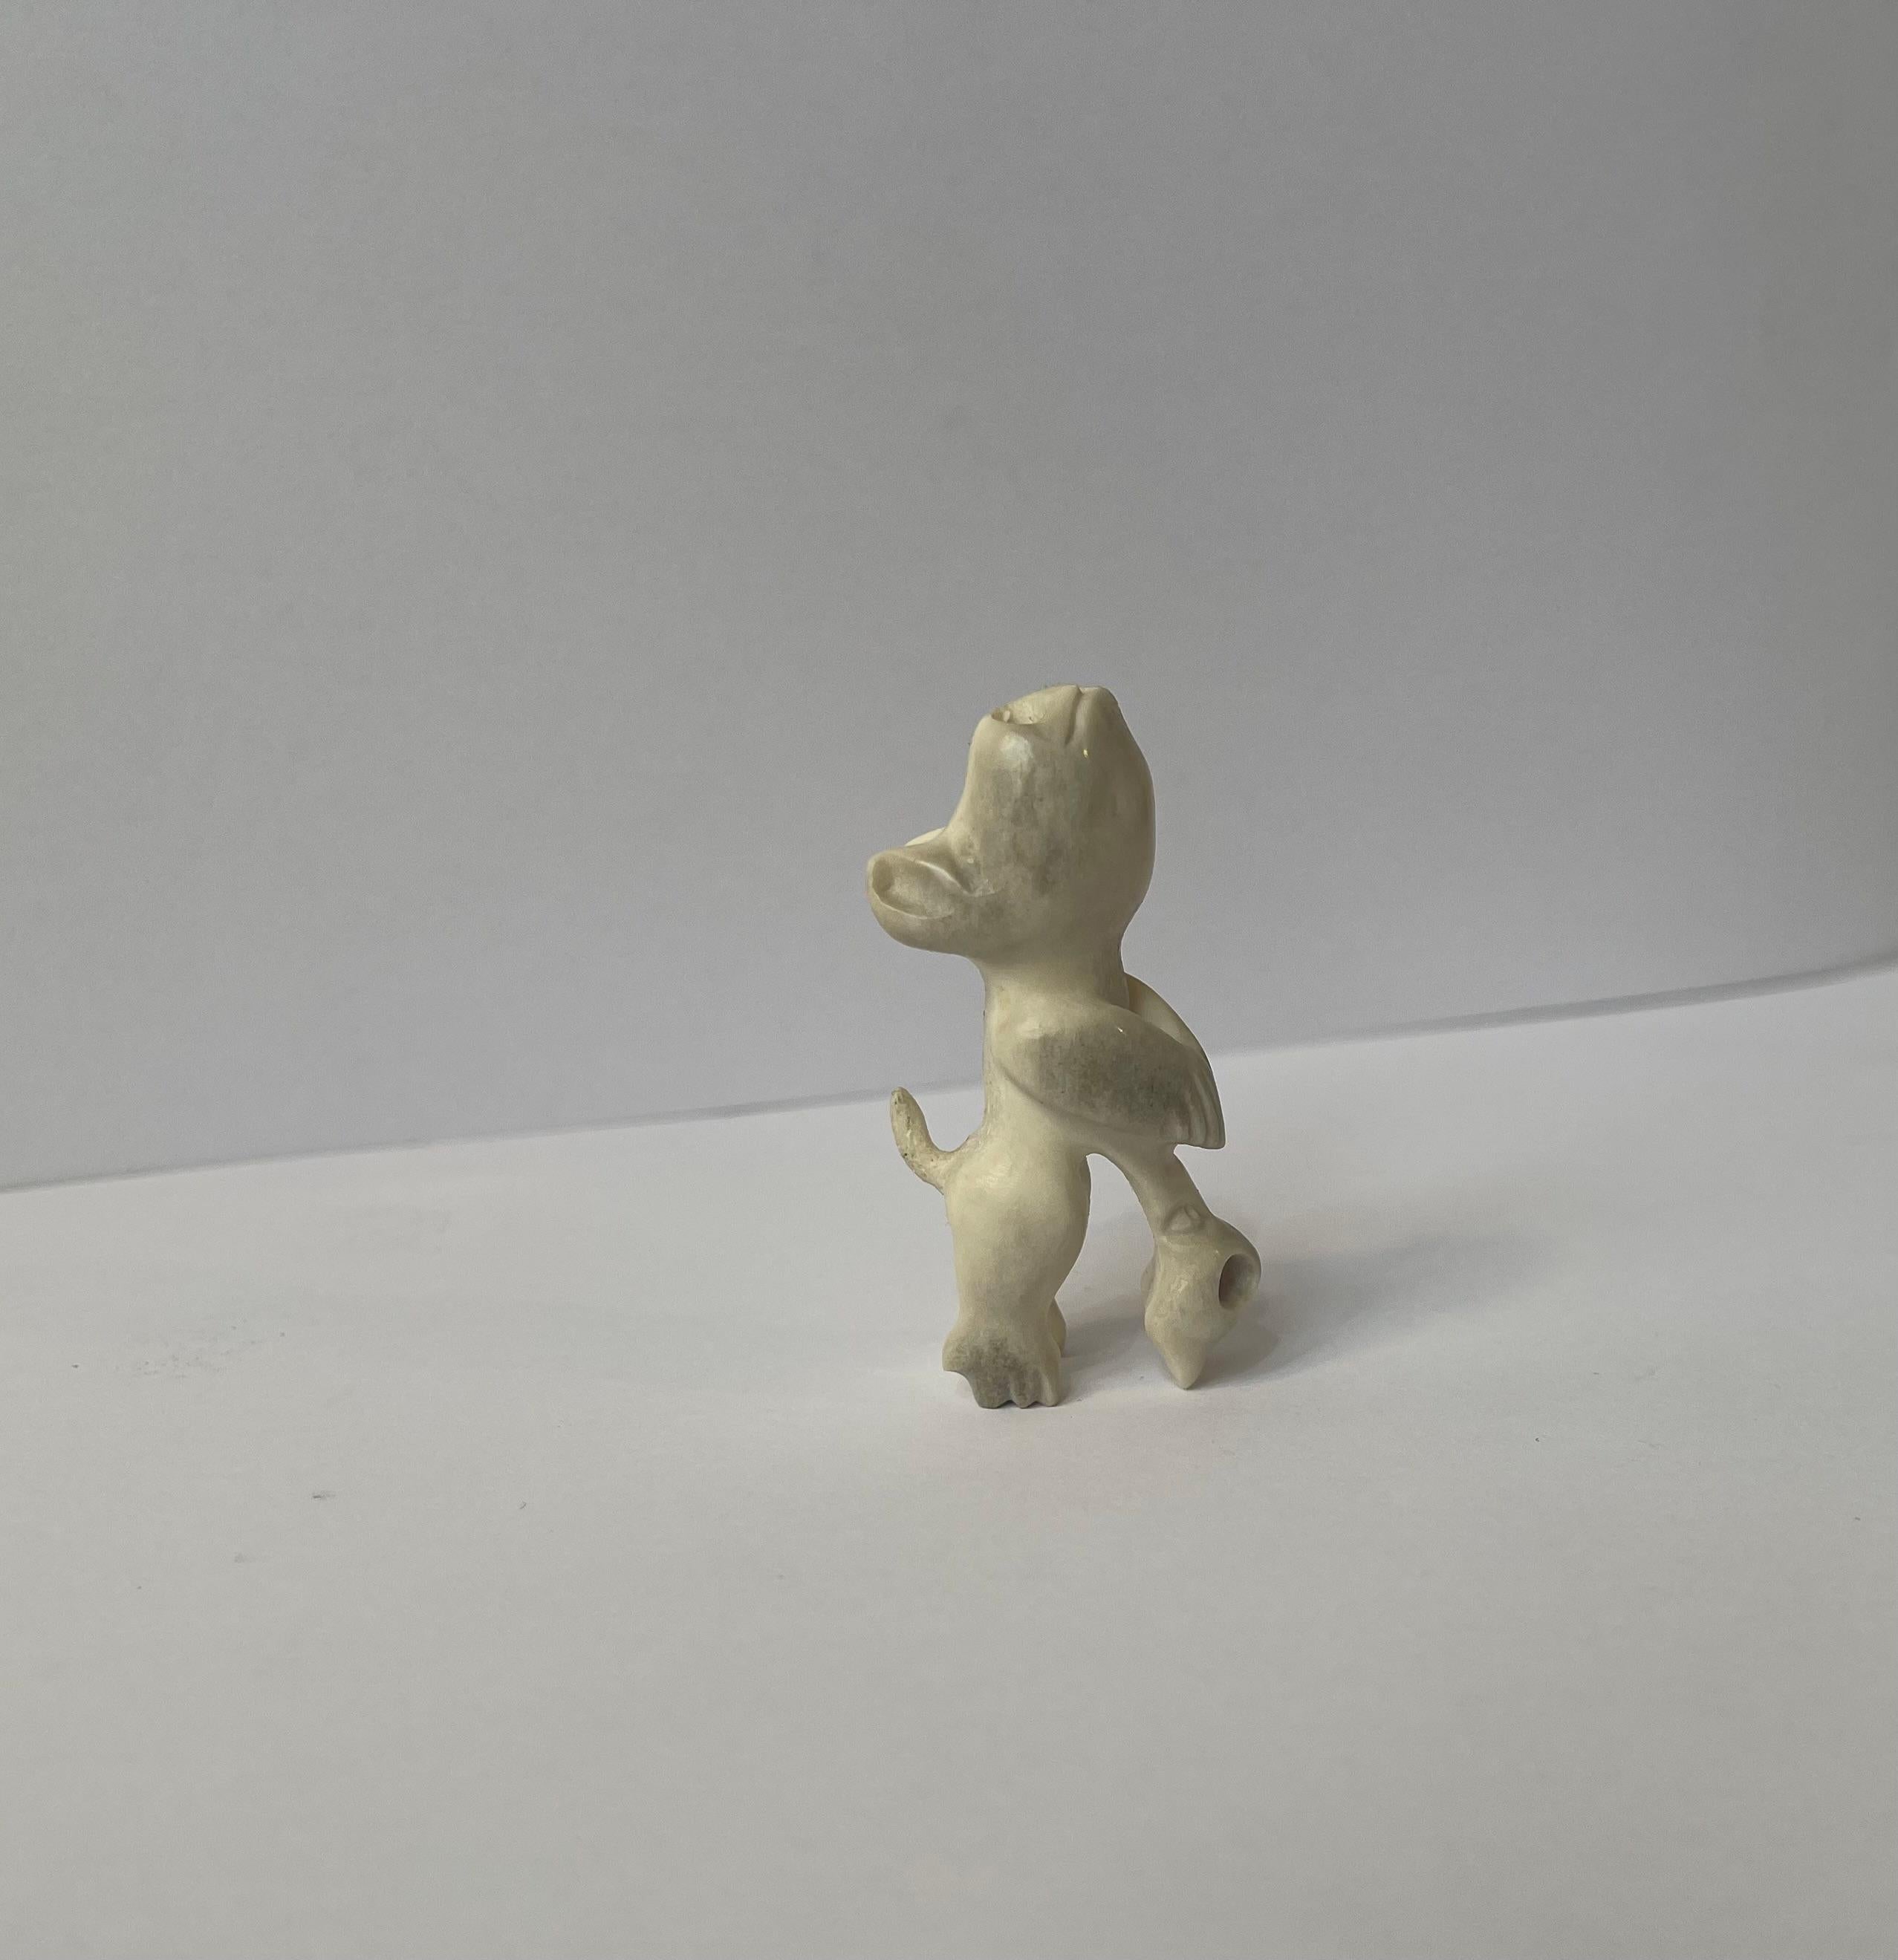 Unusual miniature Inuit Tupilak in hand-carved bone or tooth (5.2x2x3.5 cm). It depicts a cat-like mythological being/spirit. It has no signature or markings but in was brought home from Greenland to Denmark by a tradesman circa 1930-35. Wellkept